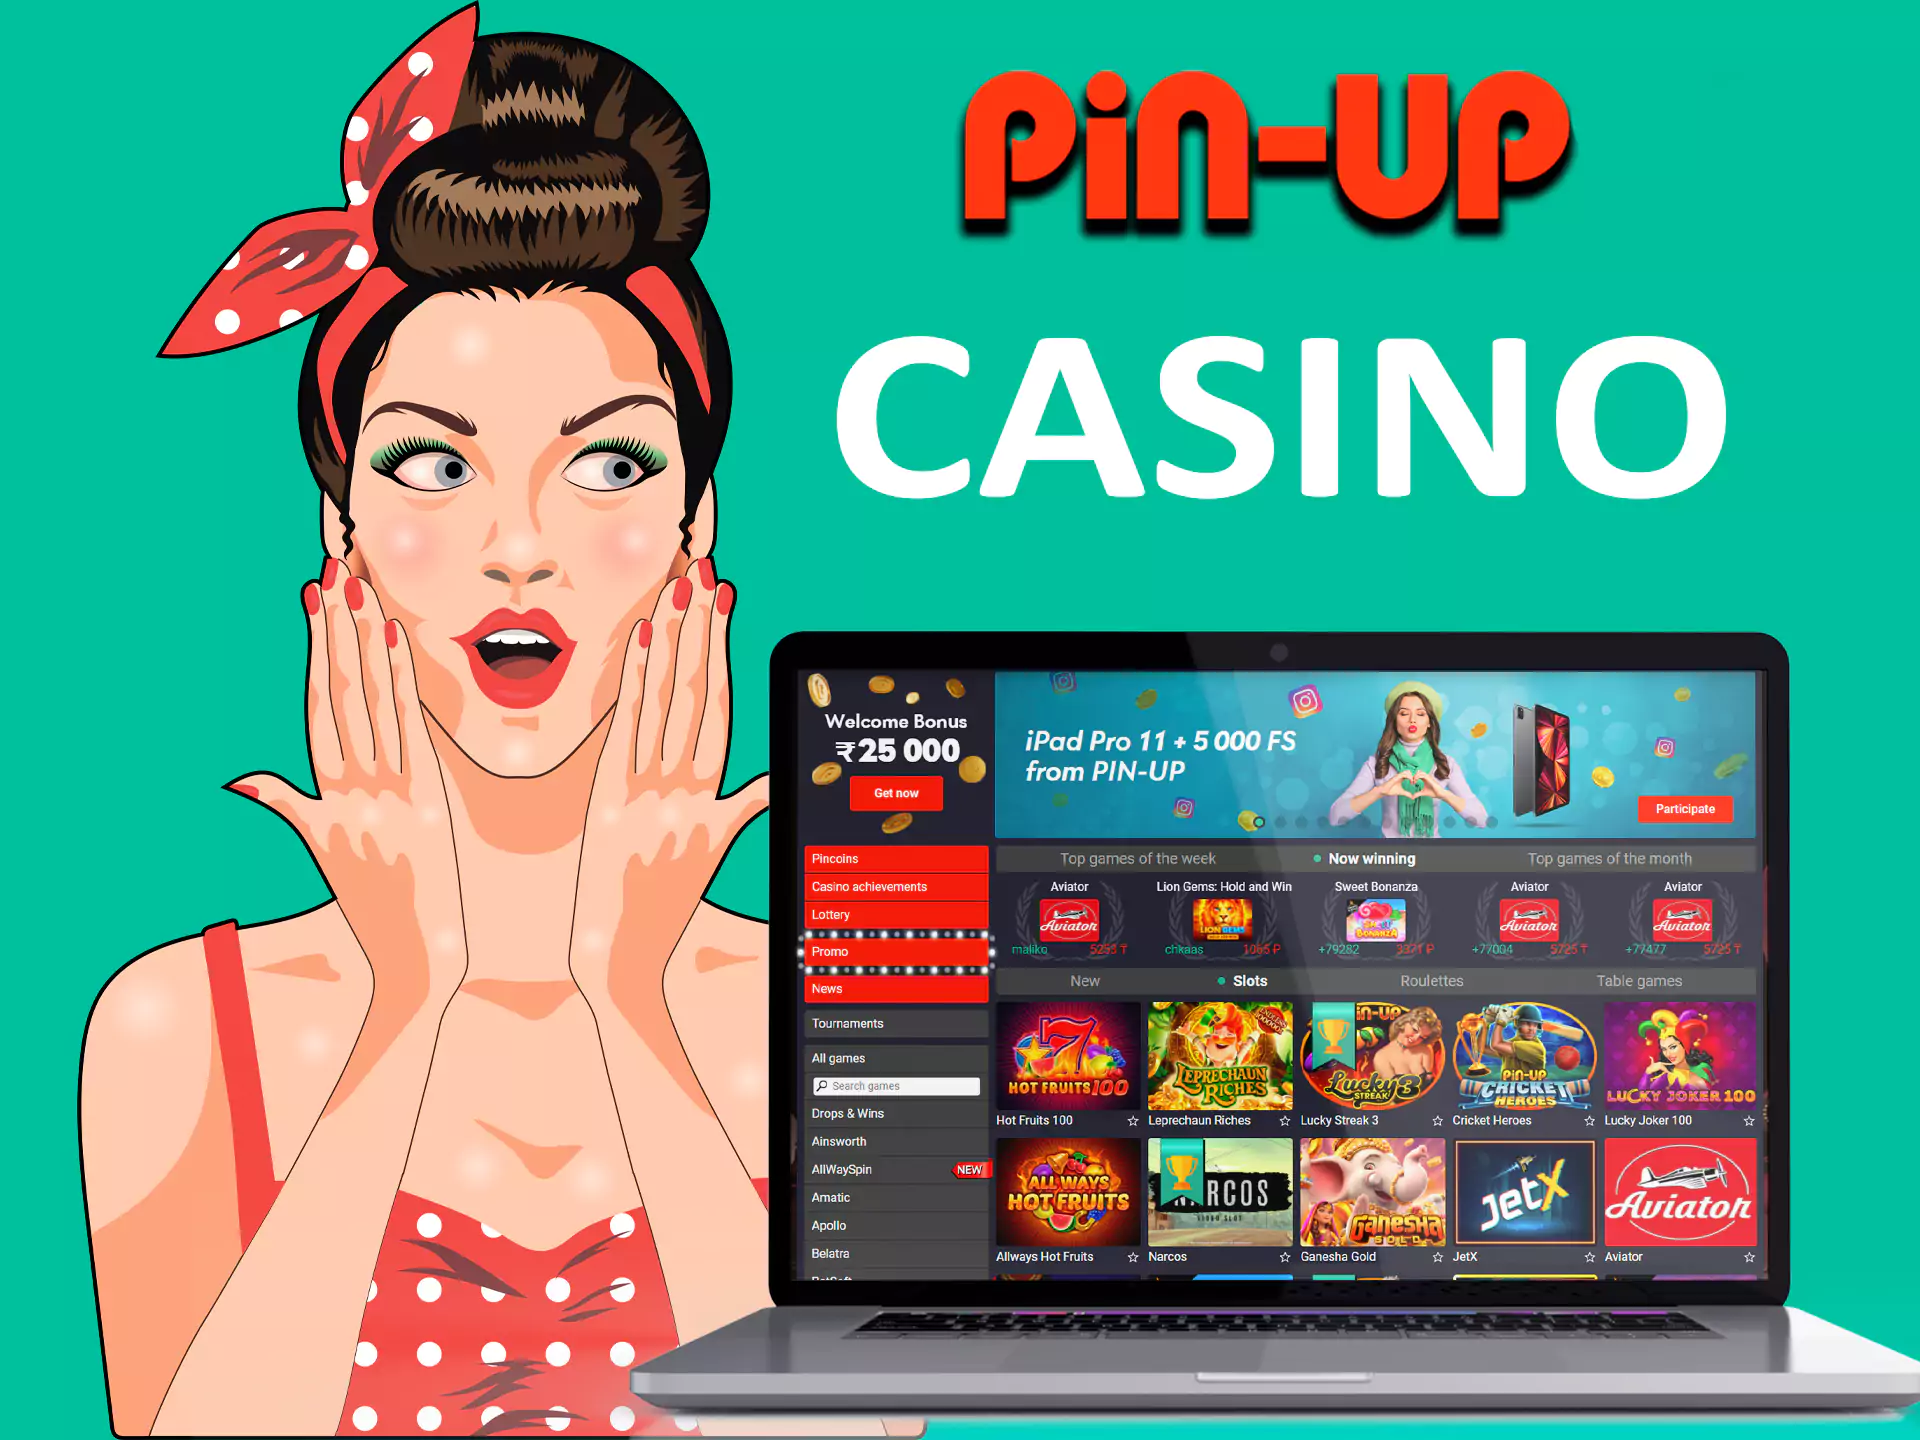 Online casino offers different board games and slots to bet on.